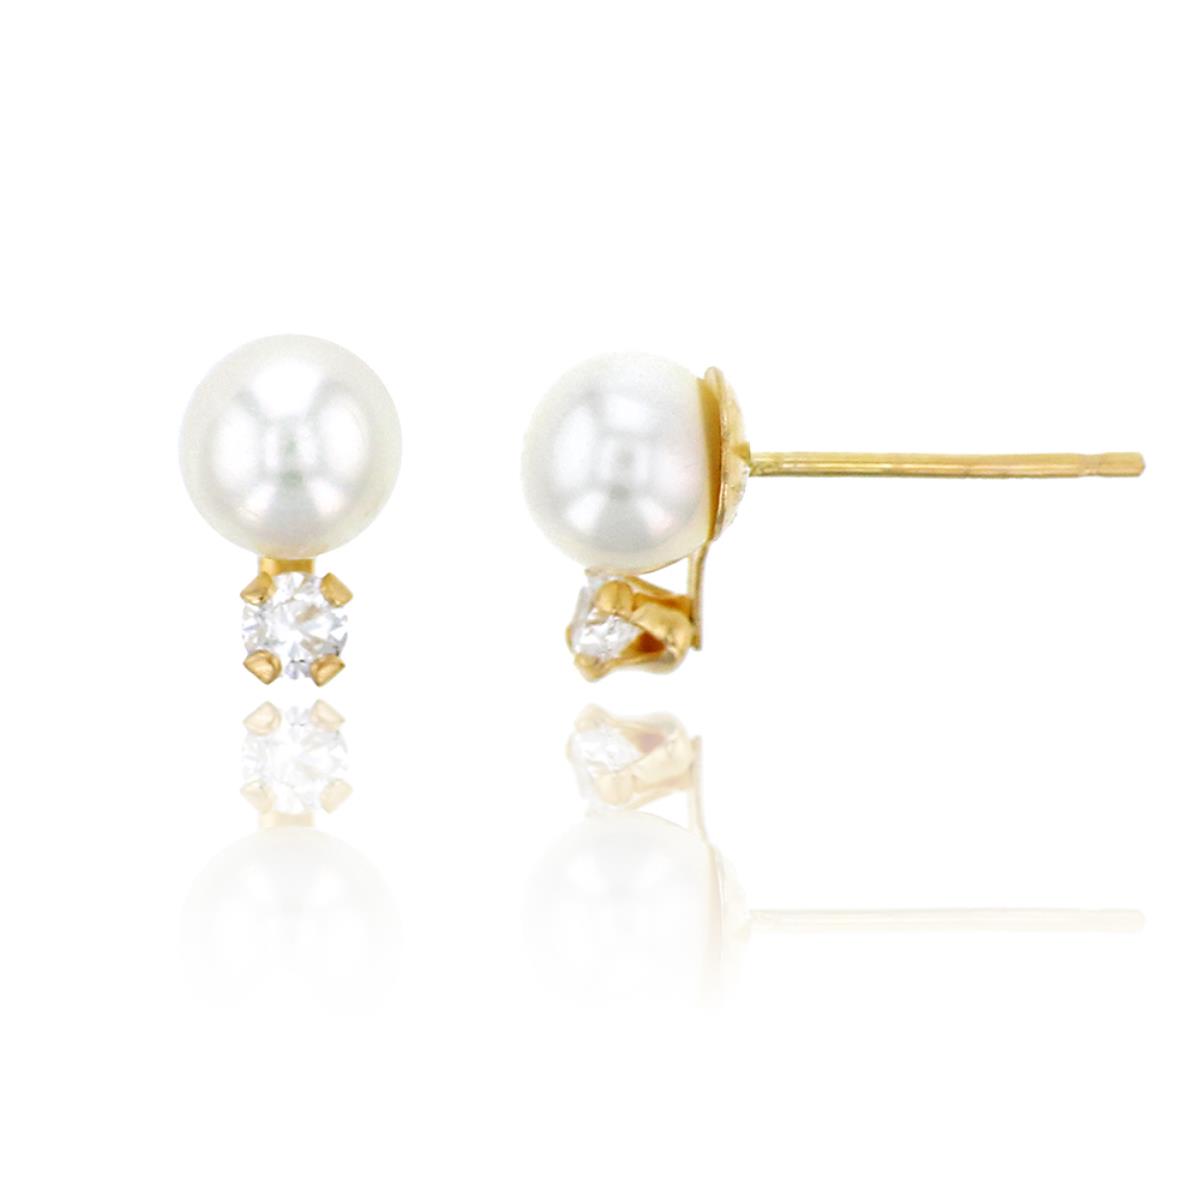 10K Yellow Gold  2.5mm Rd CZ with 5mm White Freshwater Pearl Stud Earring